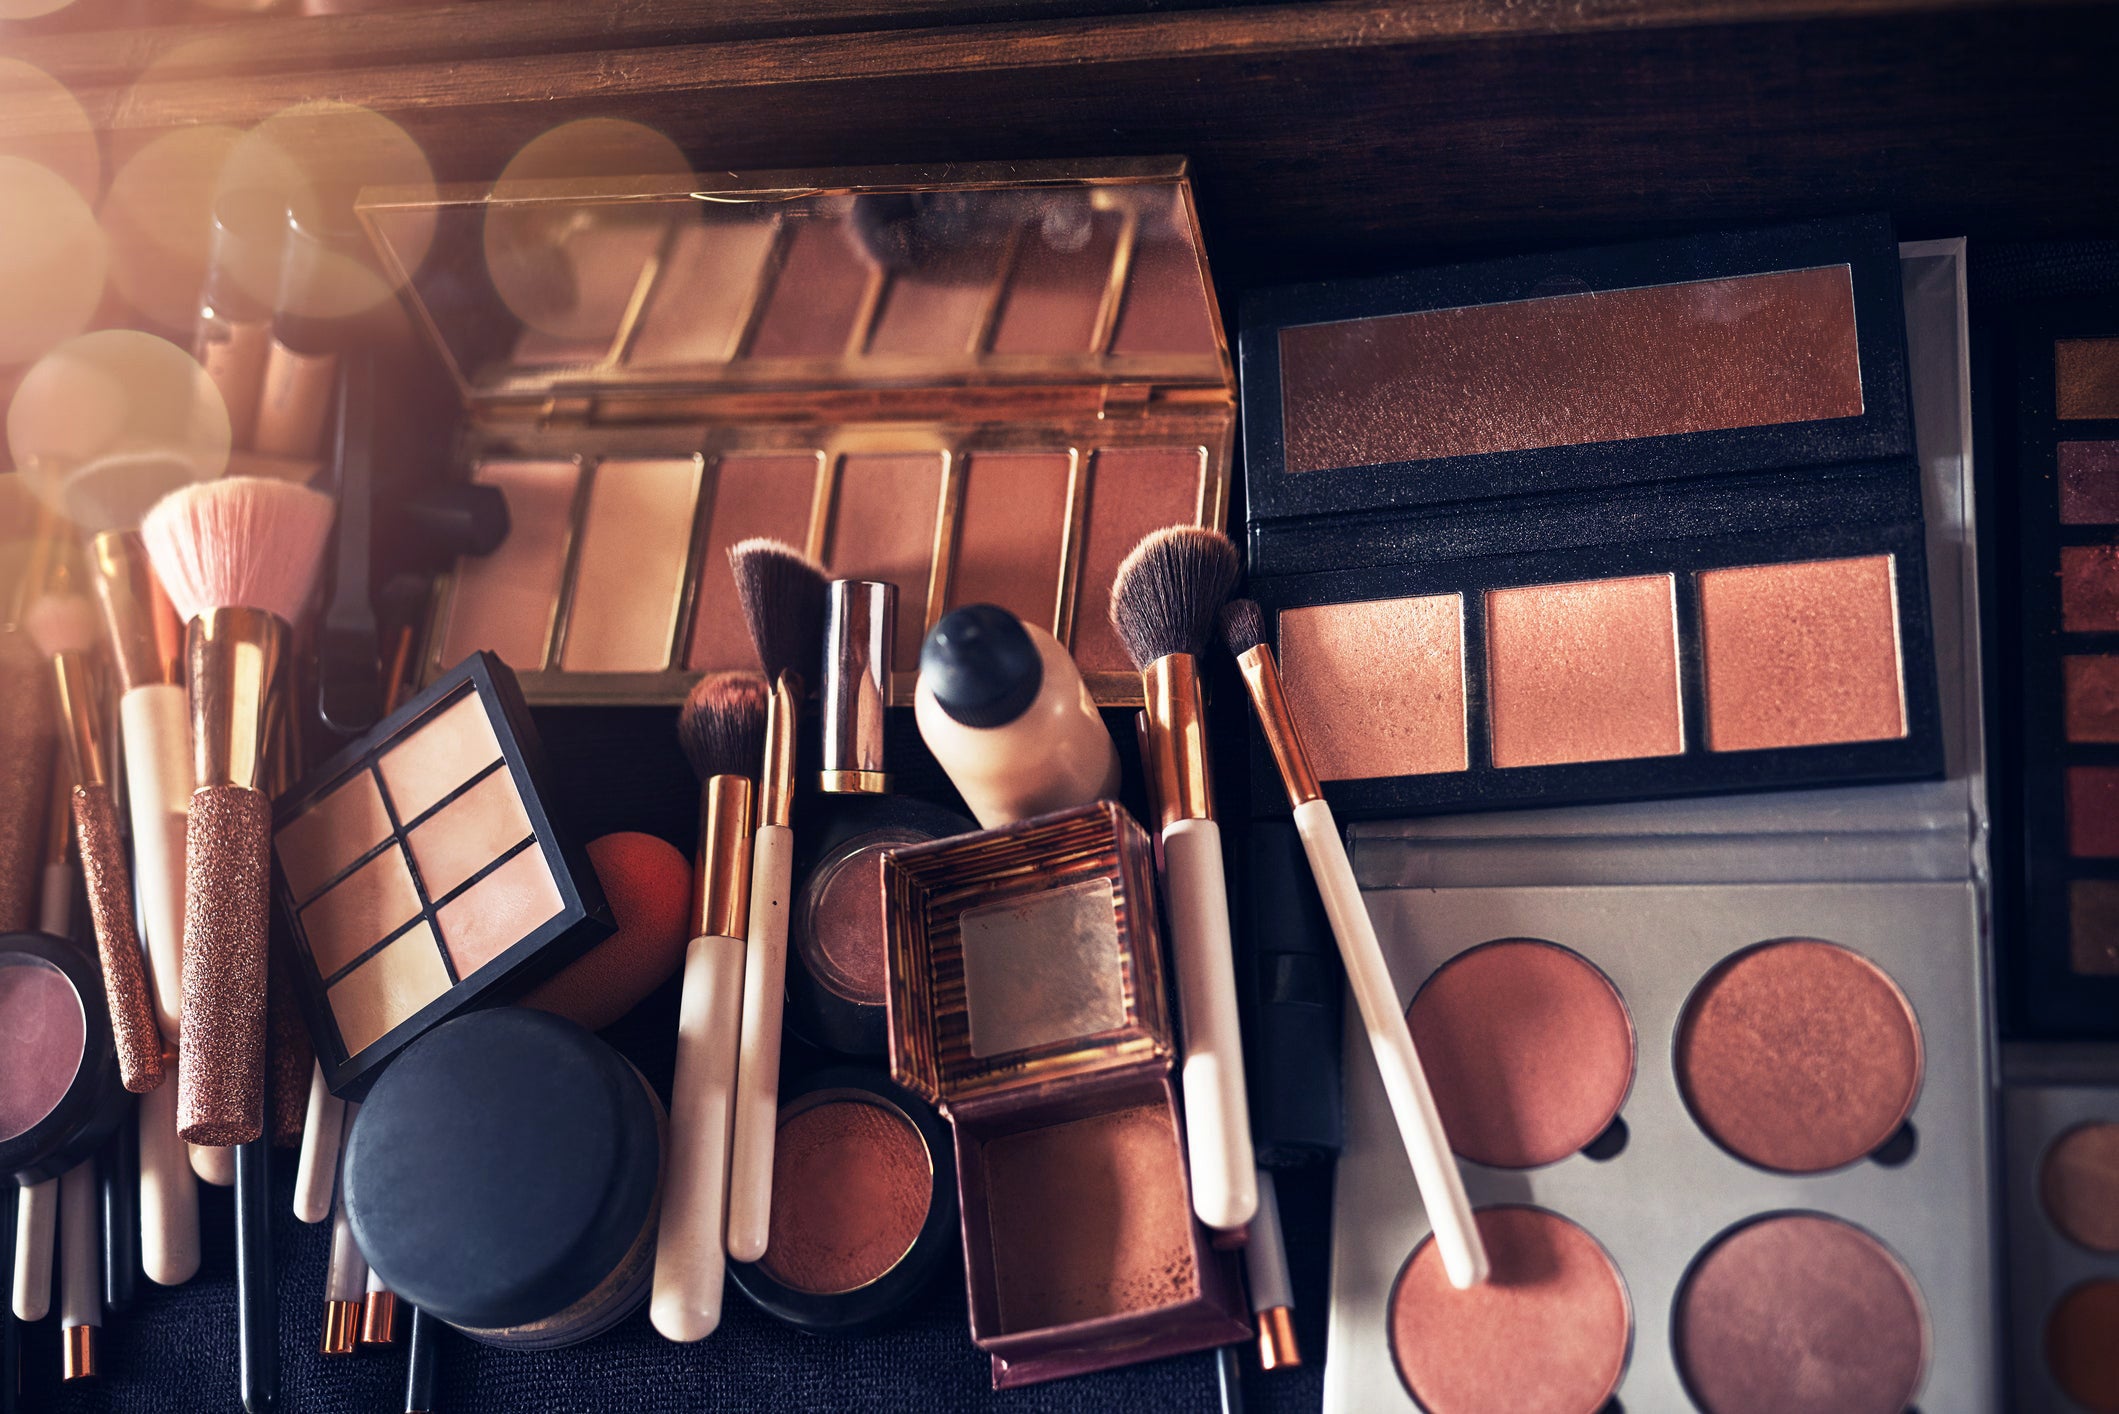 The cosmetics industry has suffered a dip during the pandemic